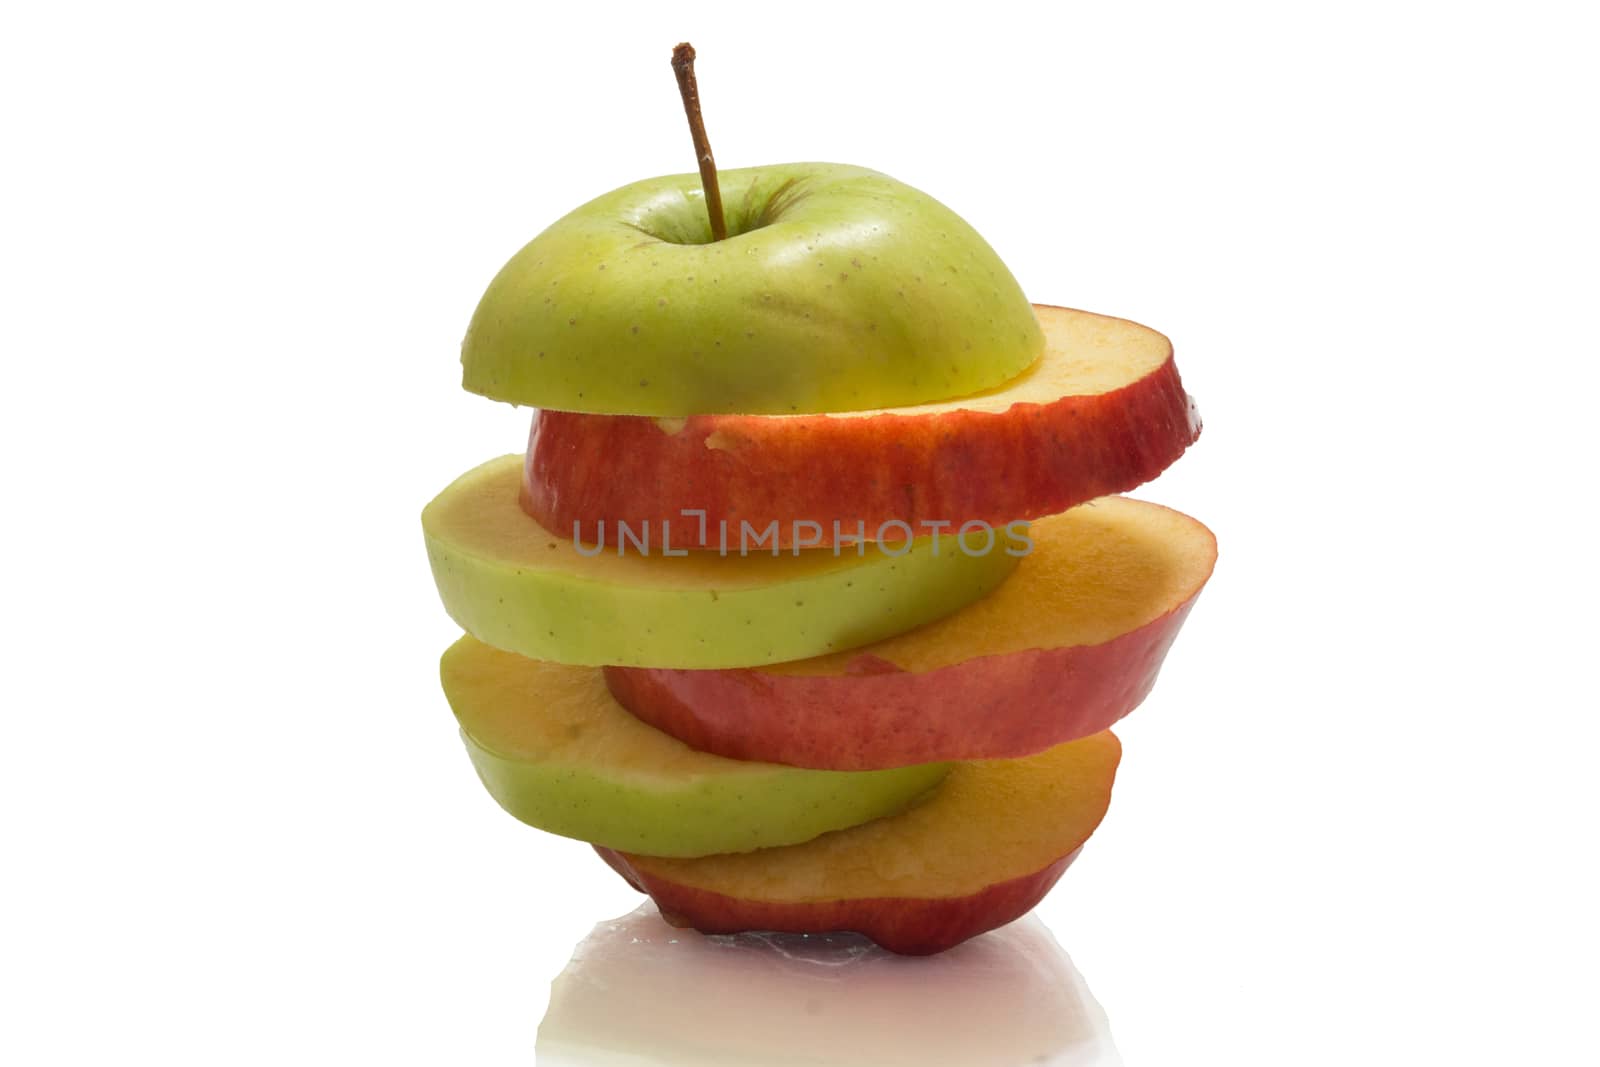 The photo shows an apple on a white background